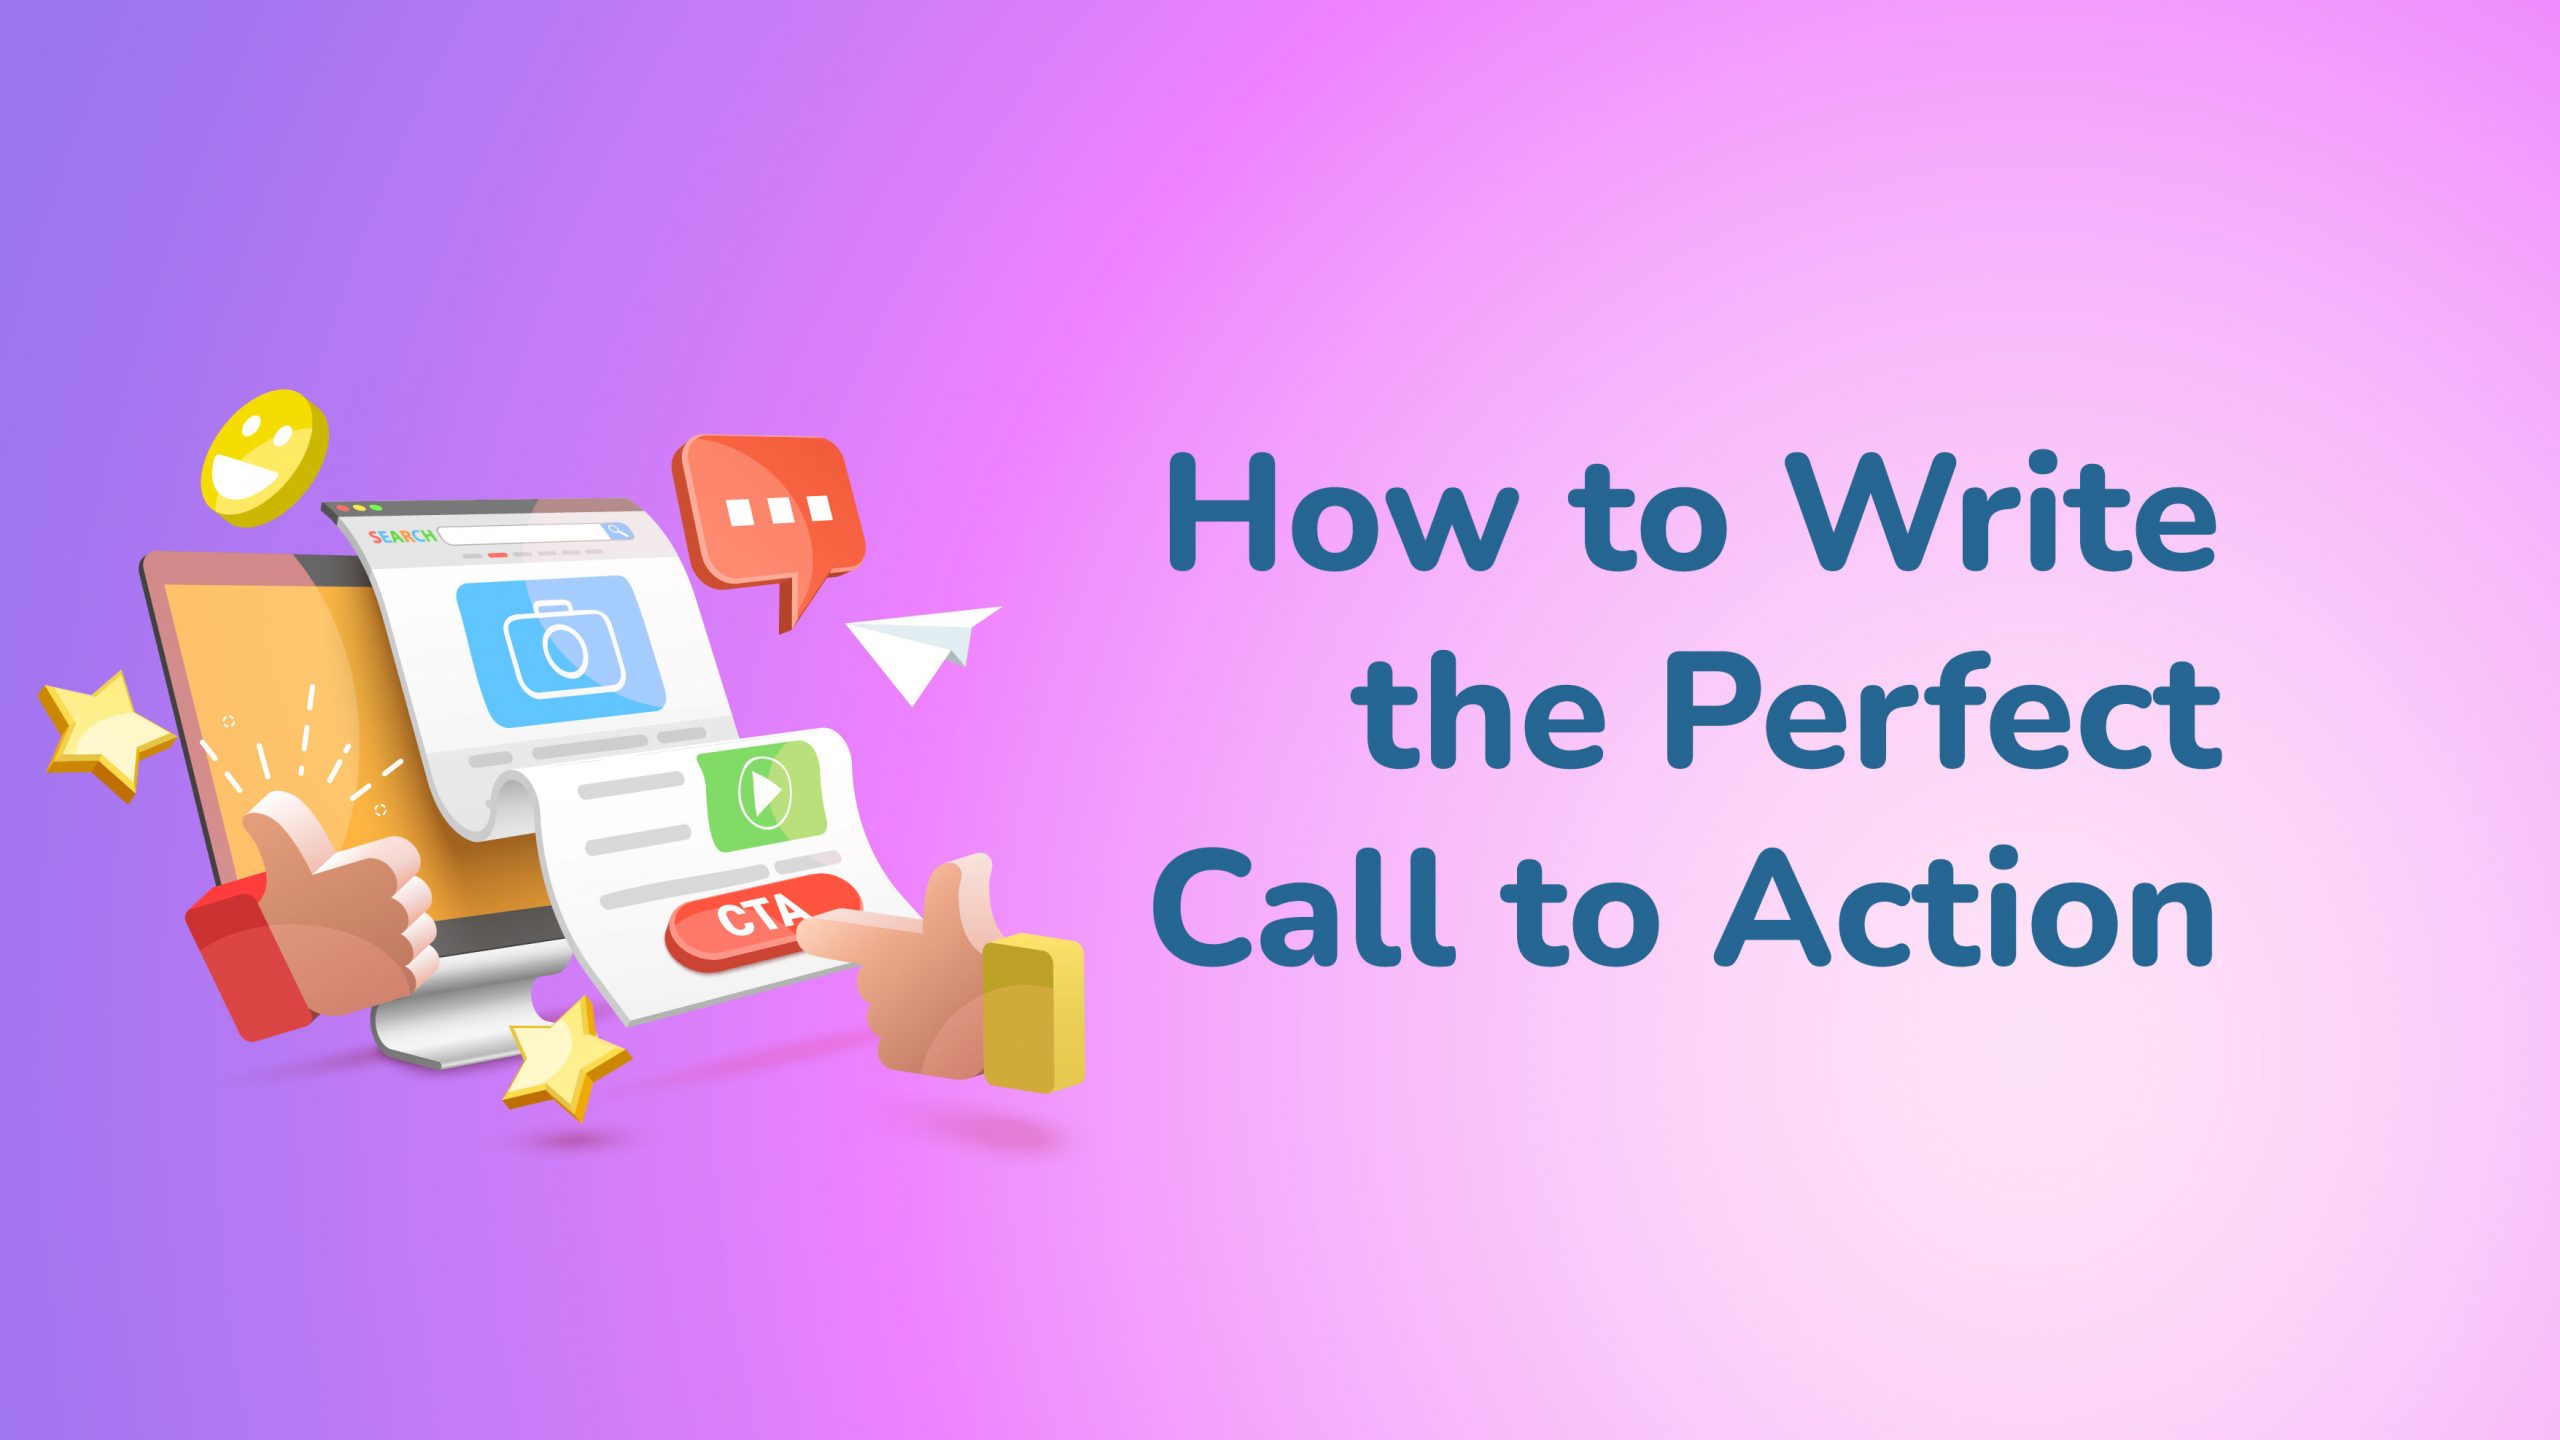 How to Write Perfect Call to Action